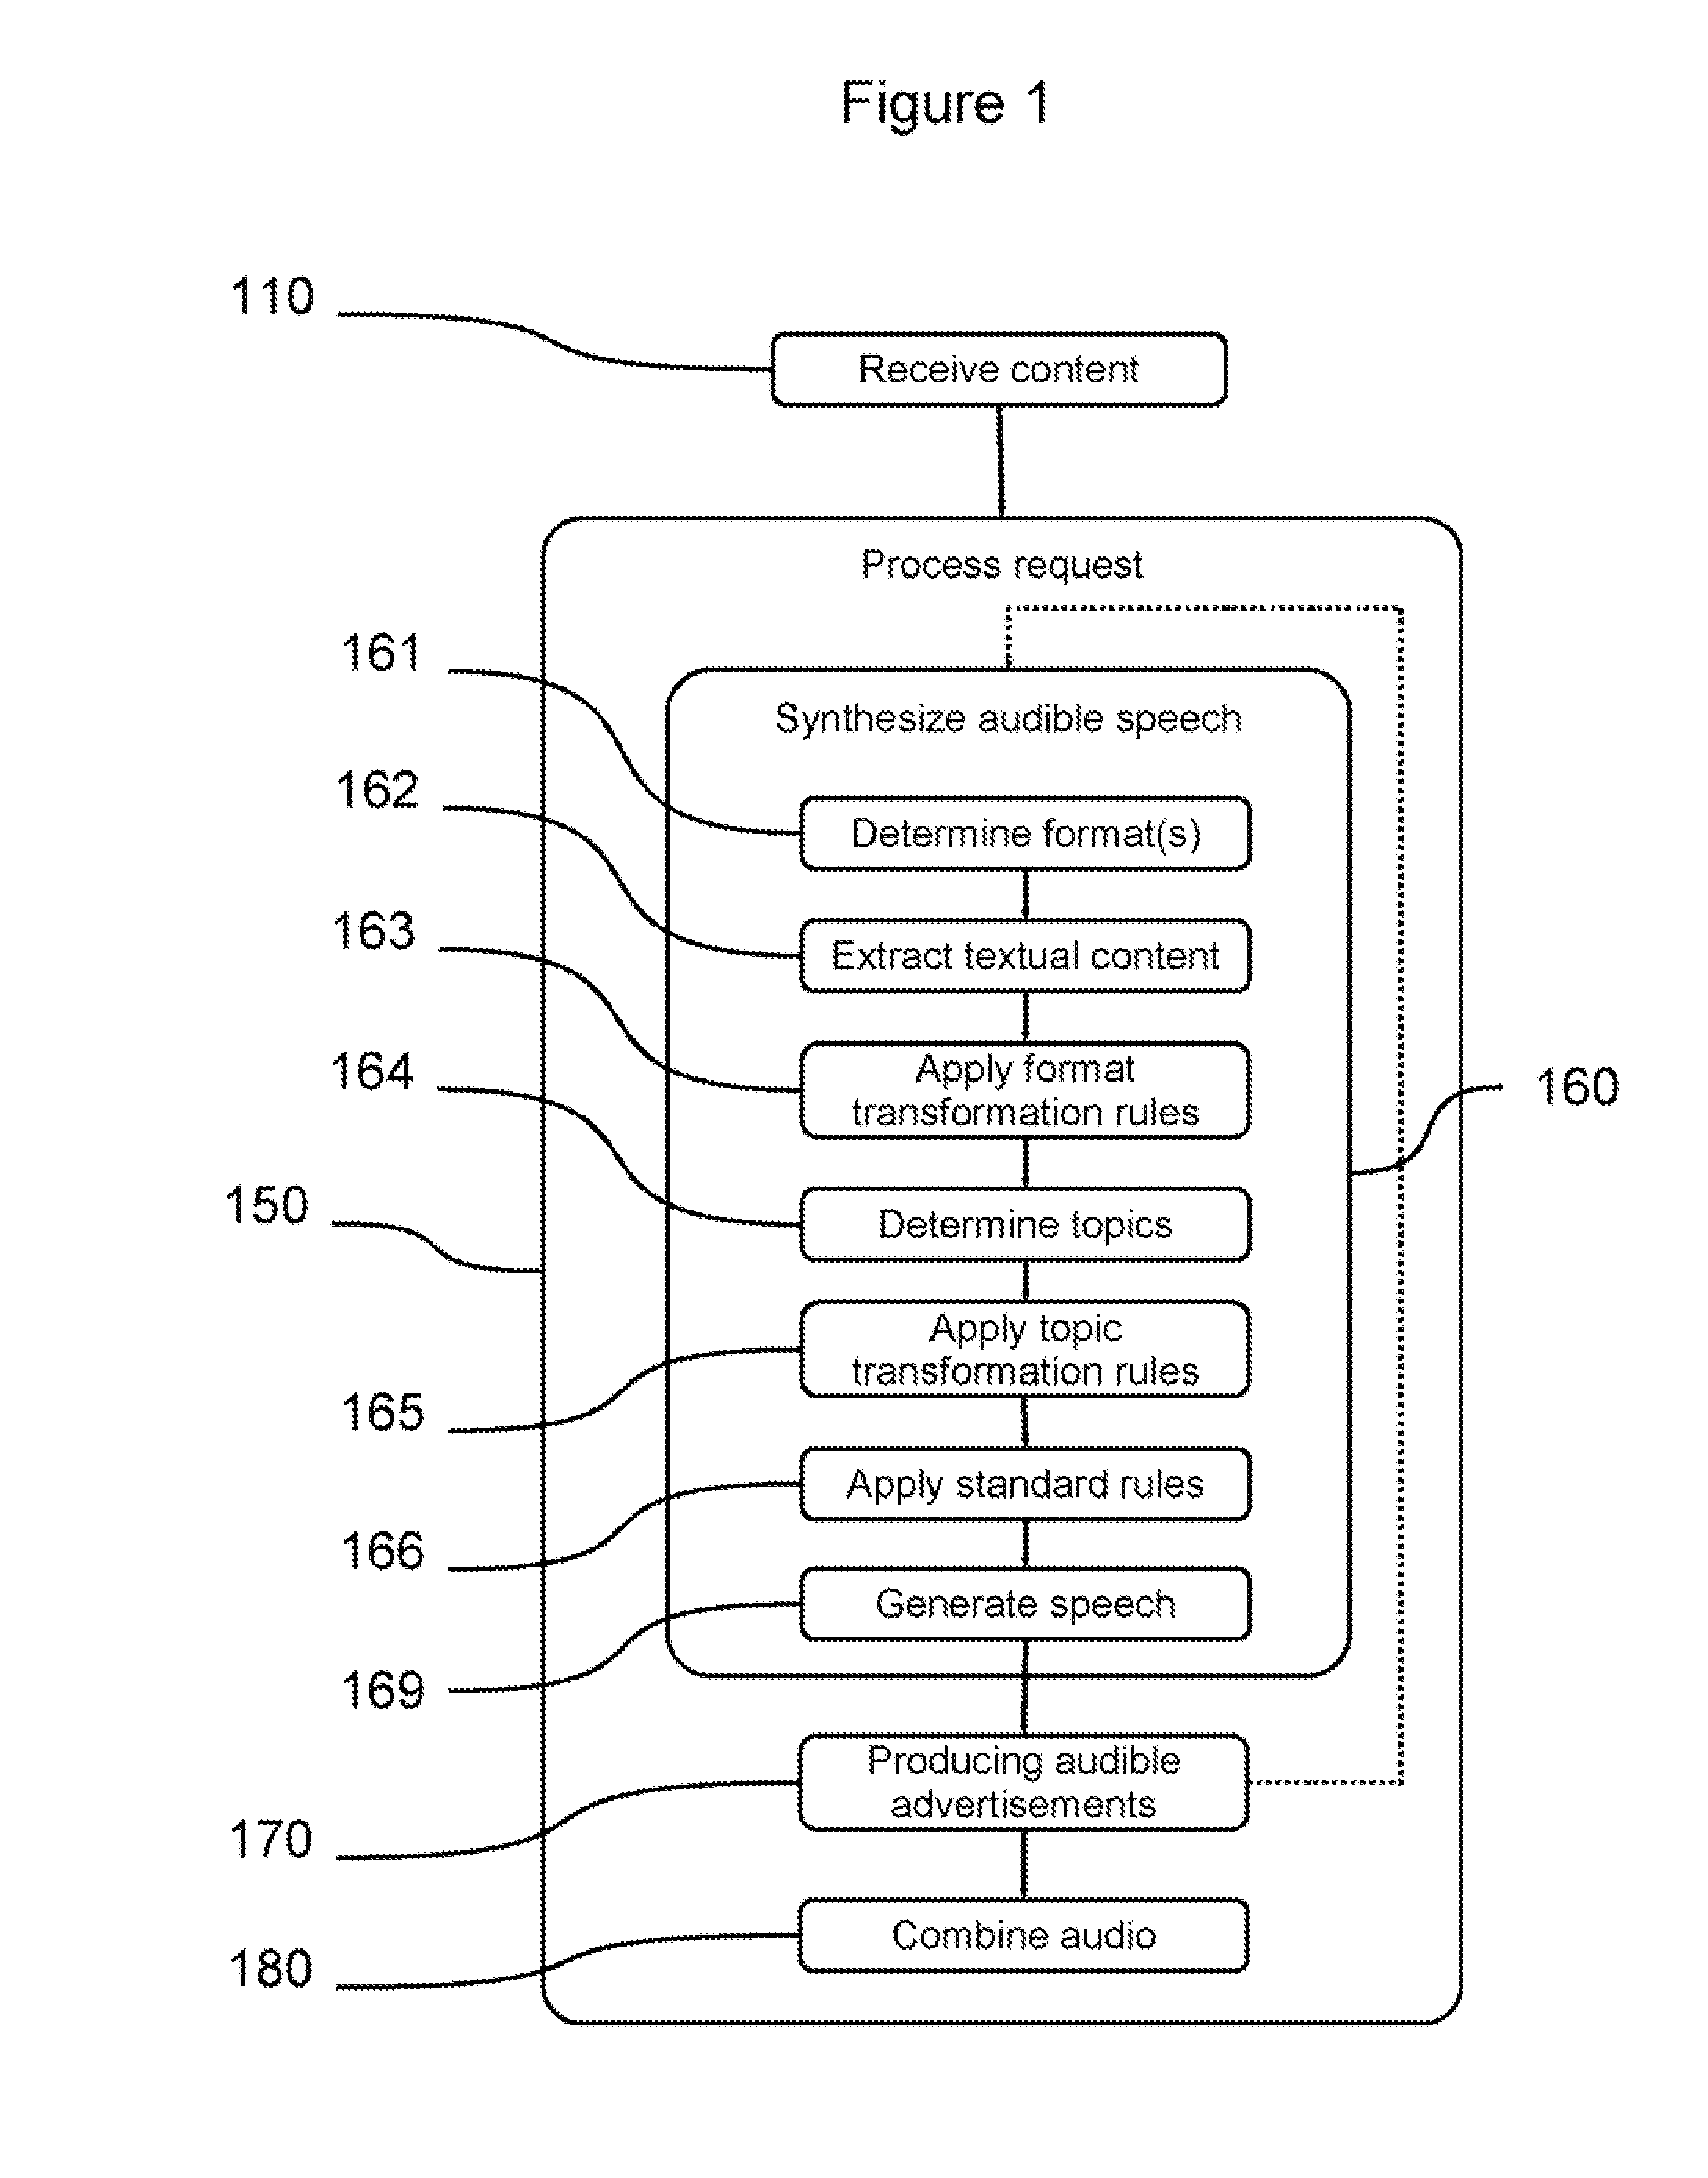 Method and System for a Speech Synthesis and Advertising Service